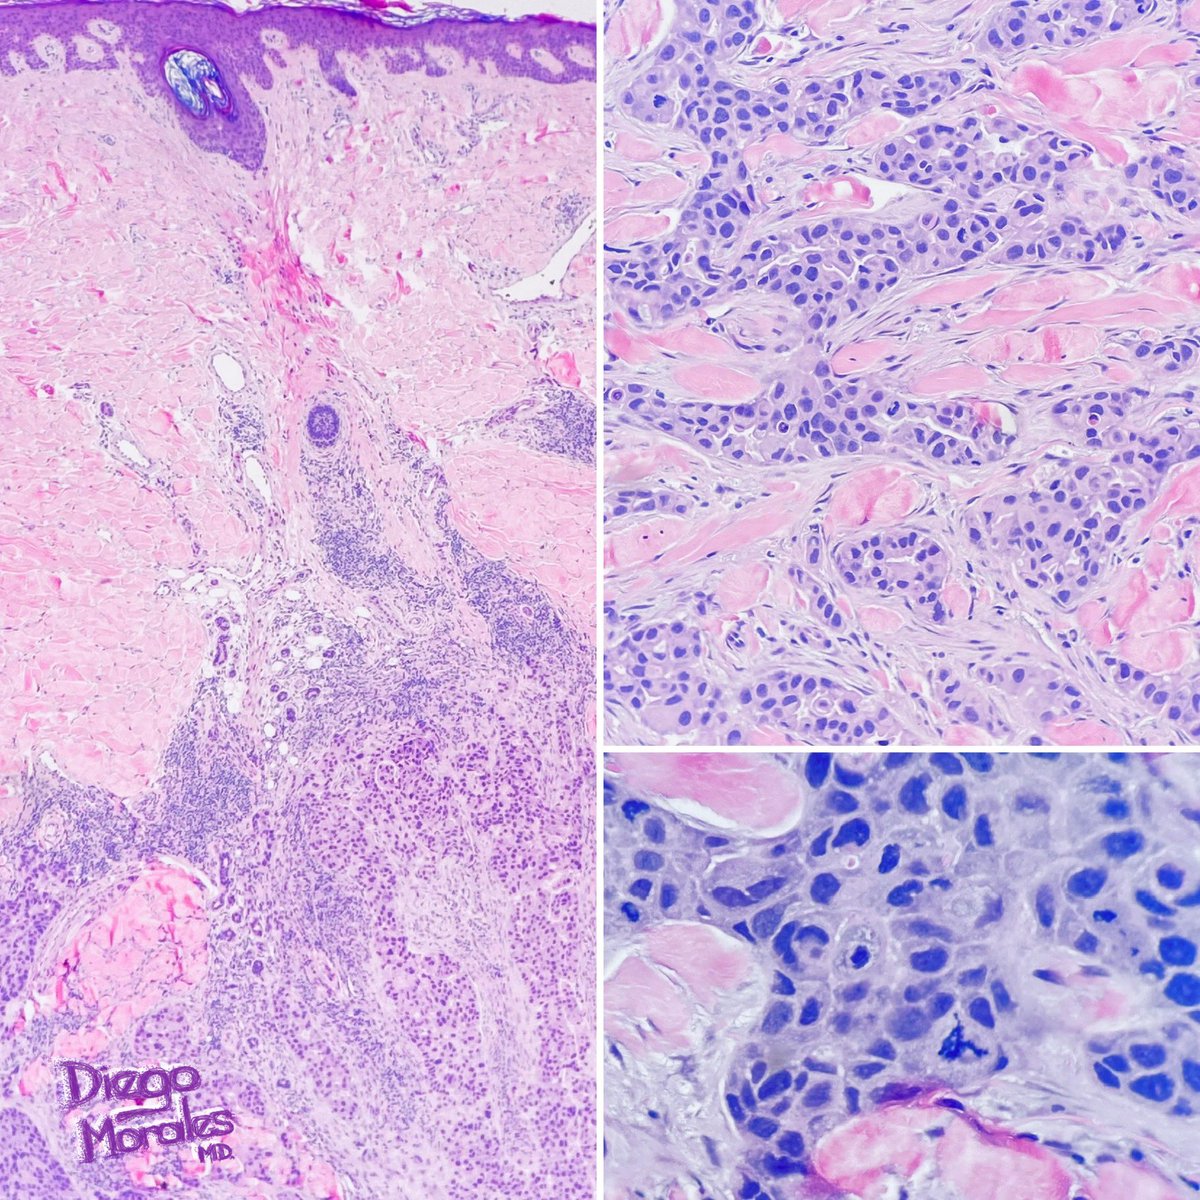 PRAME expression in a cutaneous metastasis of HER2+ breast carcinoma. Some studies (i.e. PMID: 31869767) have reported ⬆️ detection of PRAME in the HER2+ variant of breast CA. It has been correlated with worse prognosis & ⬇️ patient survival. #PathTwitter #dermpath #patologia